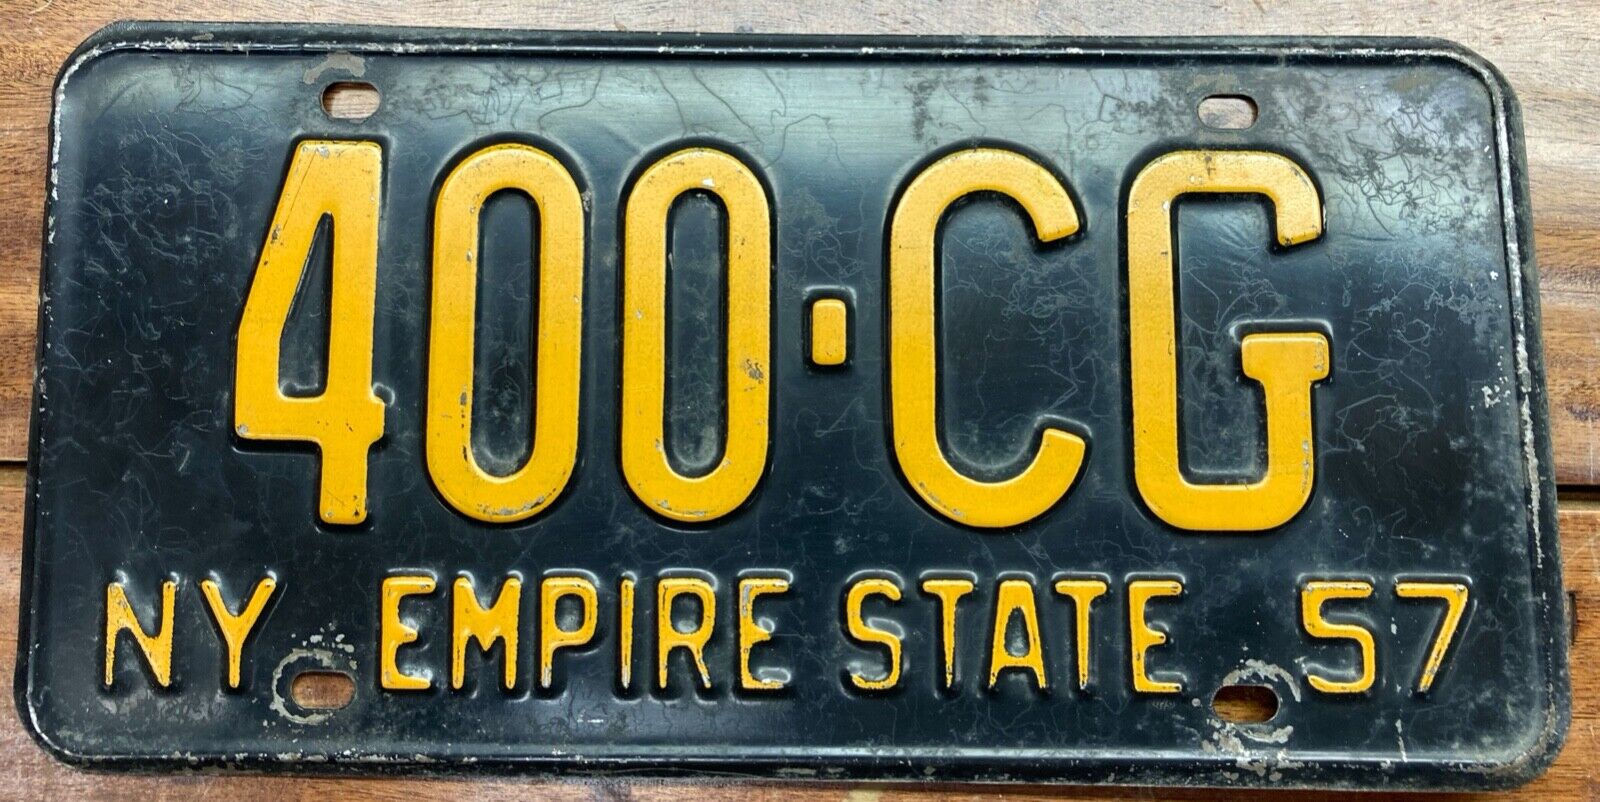 FAIRLY NICE LOOKING ALL ORIGINAL 1957 NEW YOUR LICENSE PLATE, 400 CG